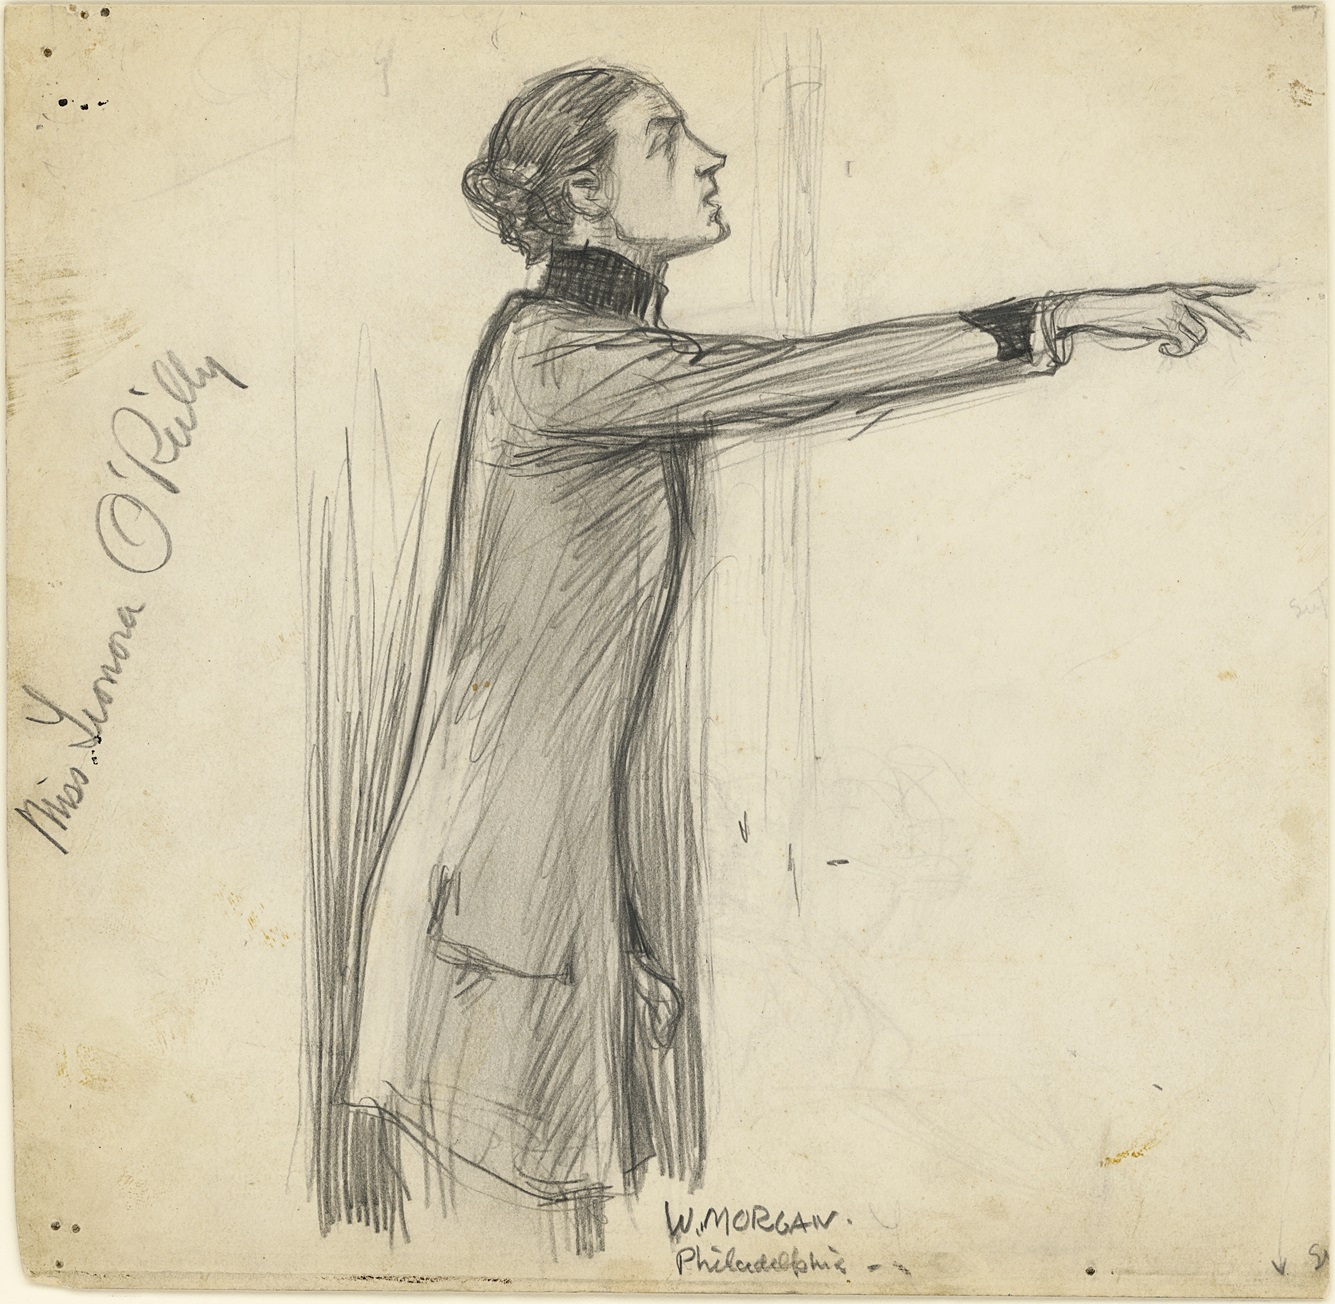 A graphite drawing of a person in profile pointing to the right